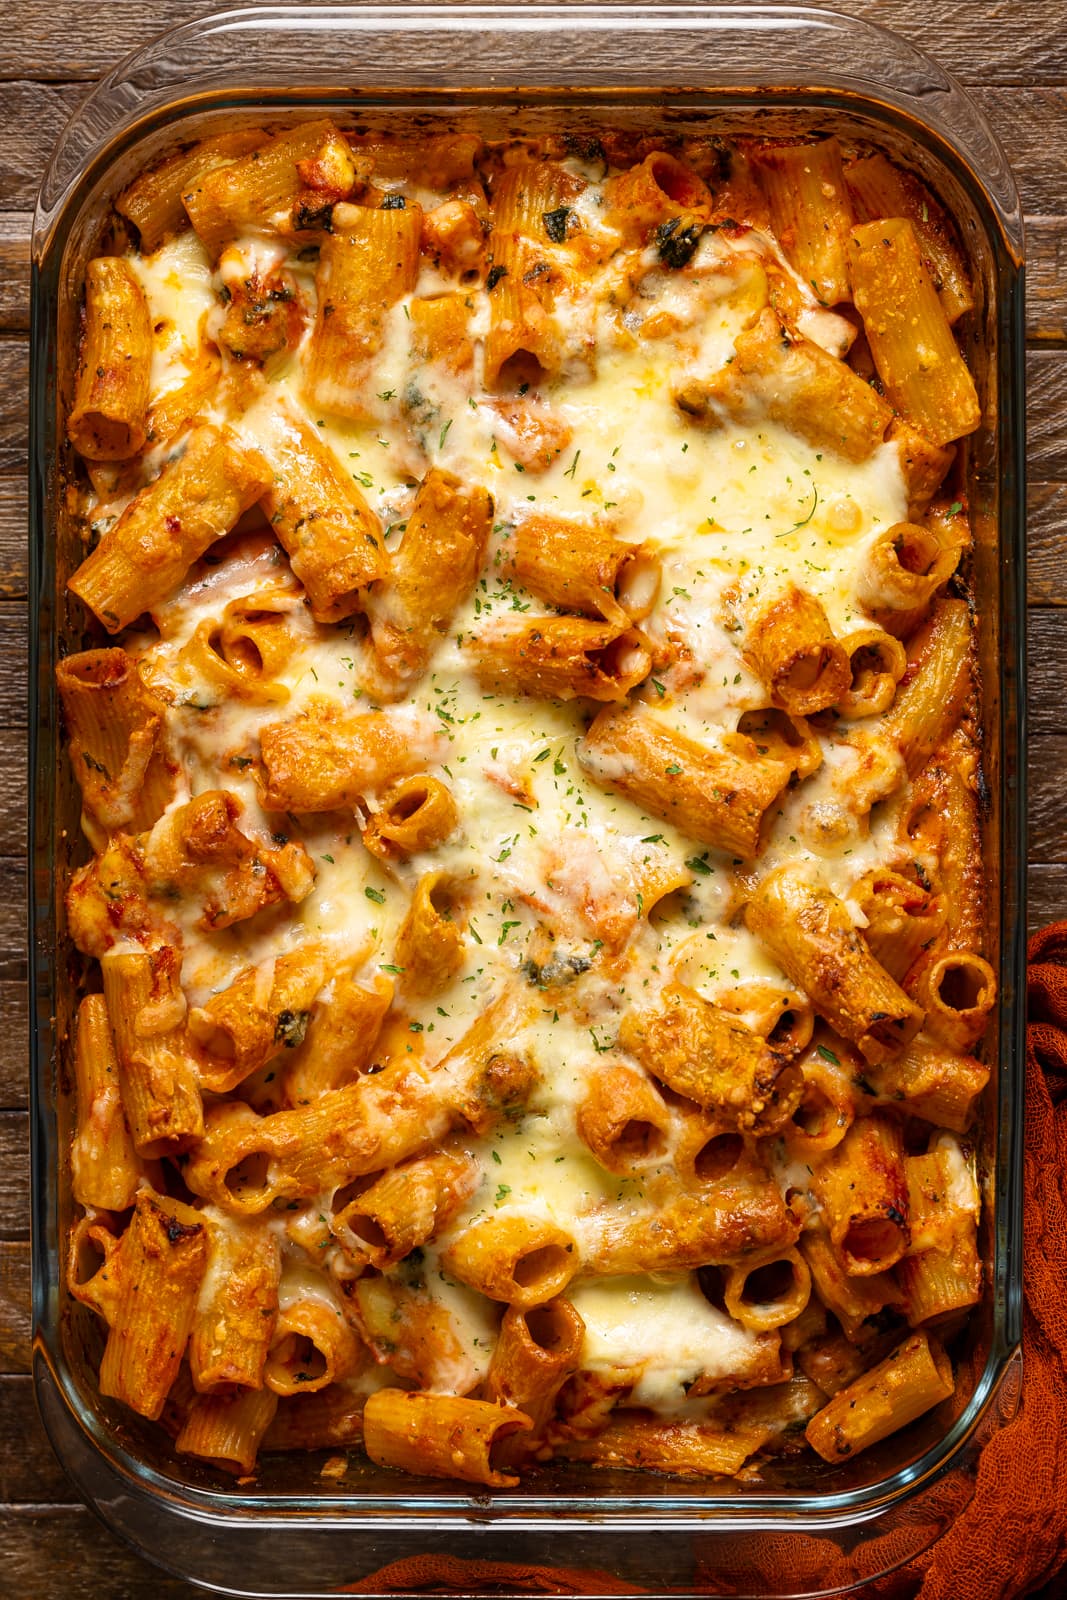 Baked pasta in a baking dish on a brown wood table.